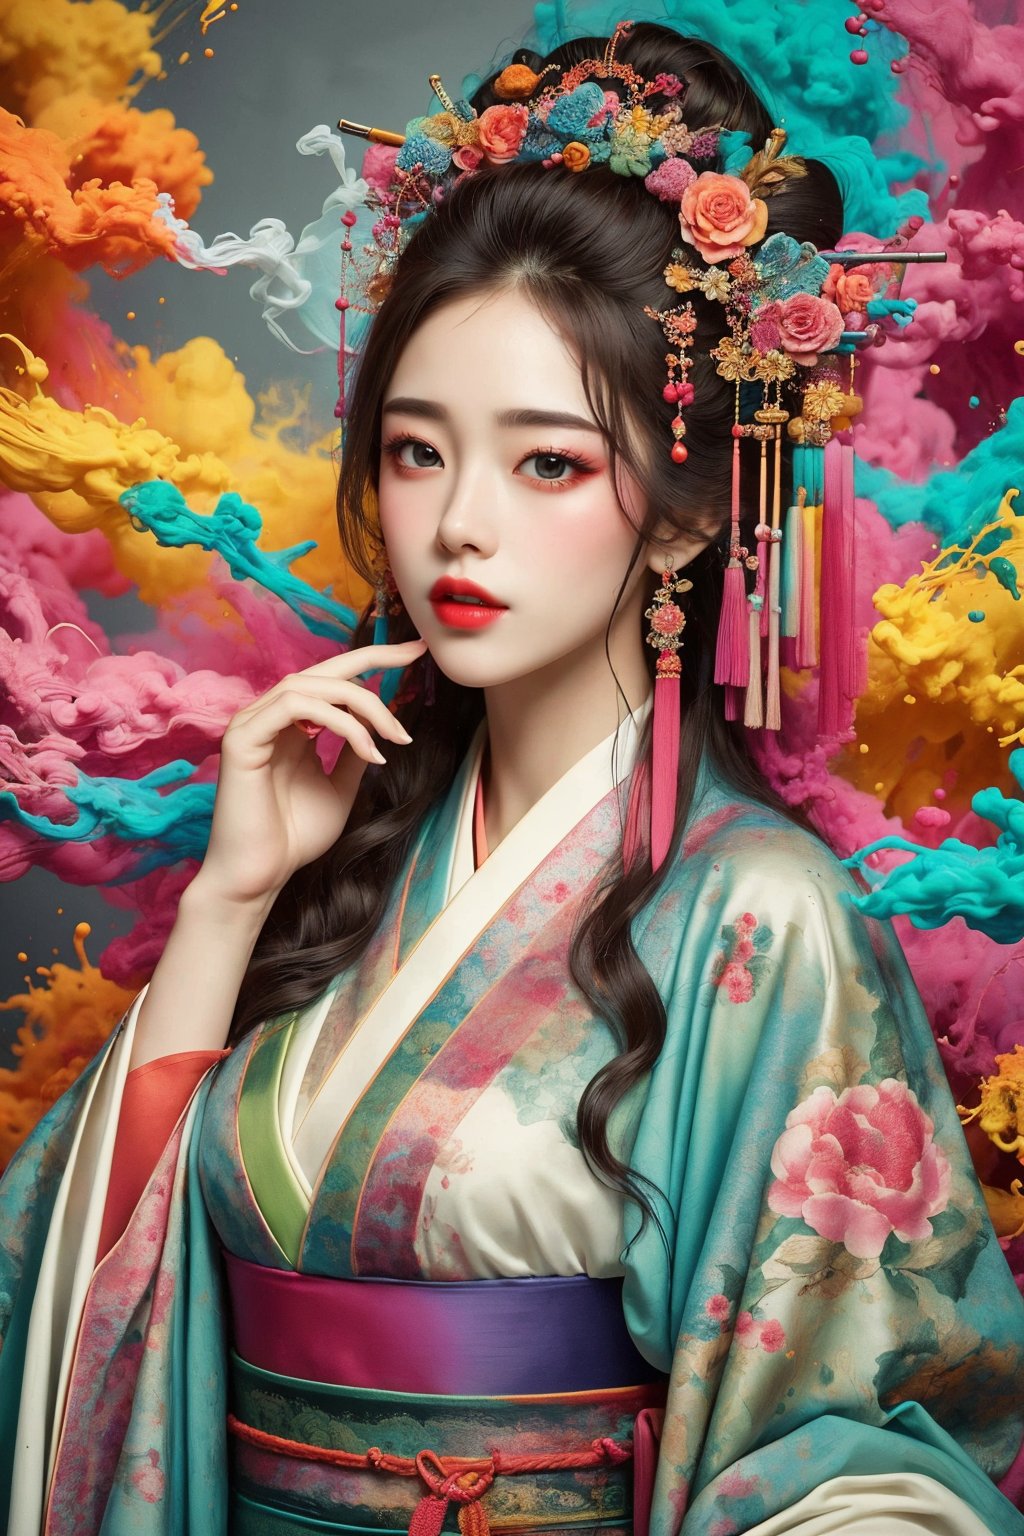 busty and sexy girl, 8k, masterpiece, ultra-realistic, best quality, high resolution, high definition, HANFU, SPLASH COLORFUL INK, COLORFUL SMOKE, FLOWER HEADPIECES,SIH